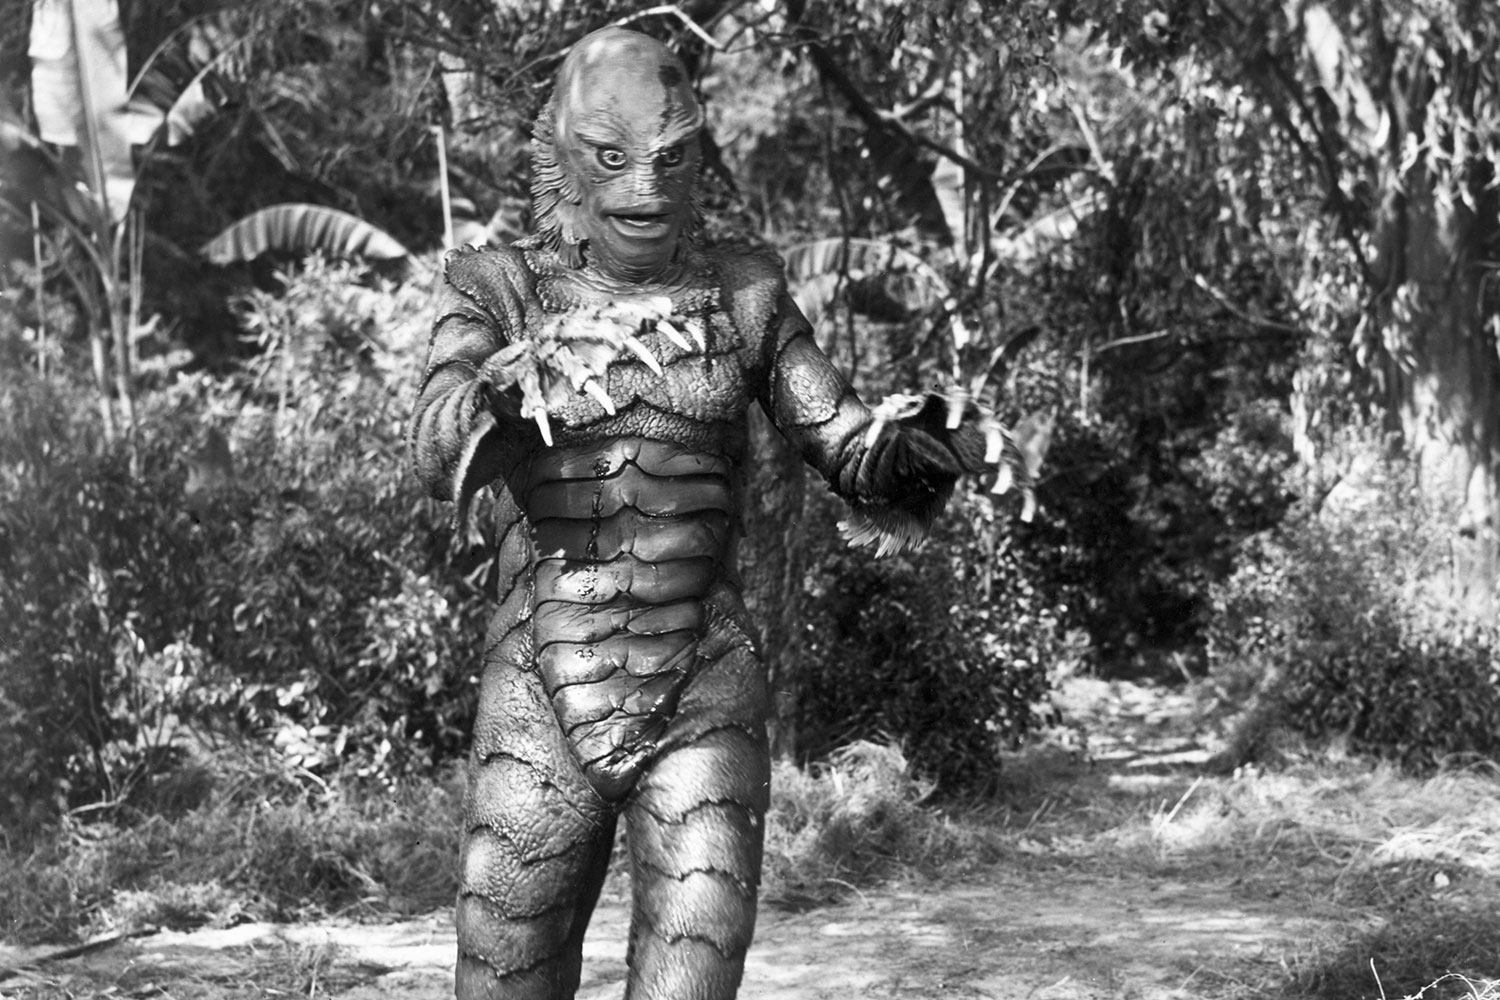 Name That Movie! Can You Fill in Blank & Name Movies Wi… Quiz The Creature from the Black Lagoon